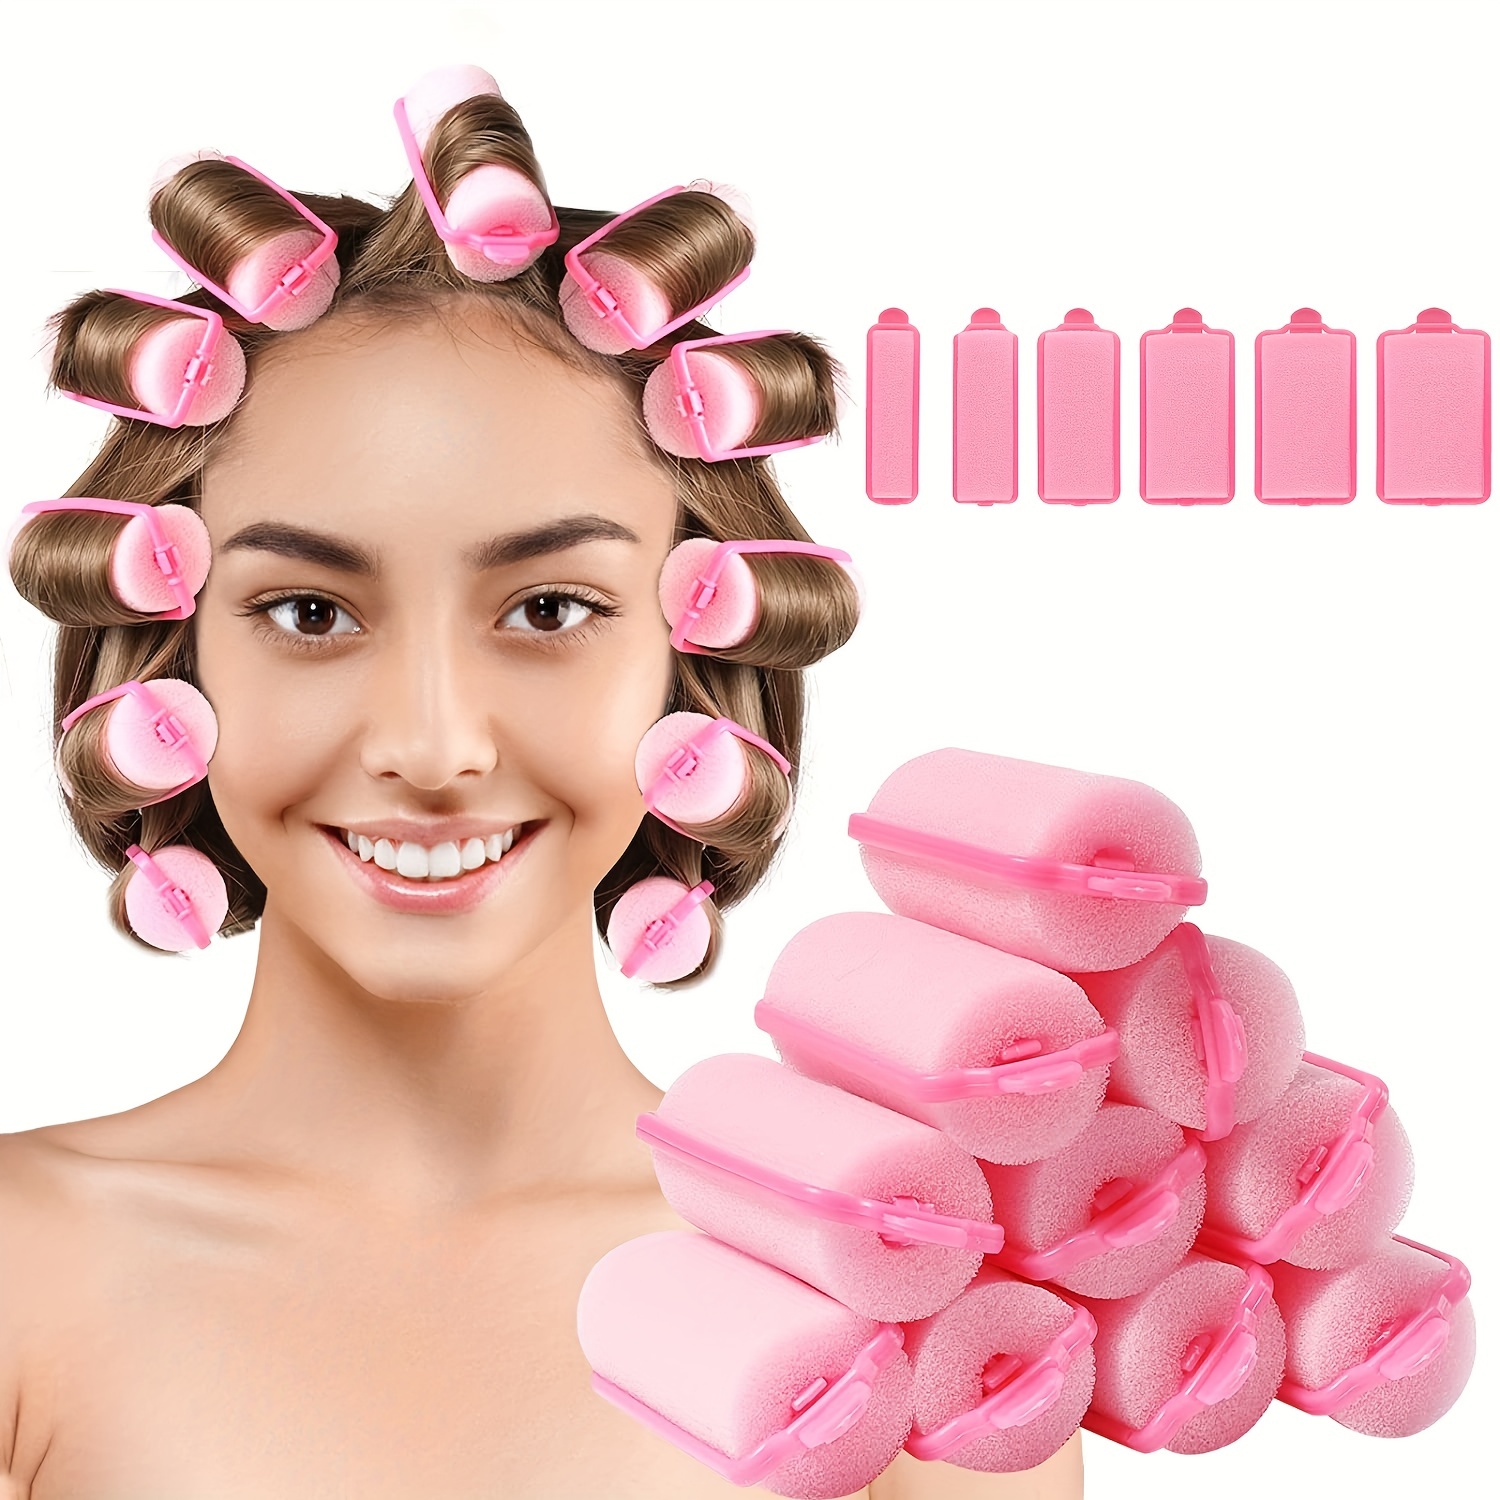 

14pcs Flexible Foam Hair Rollers For Comfortable Sleeping, Easy Hair Styling And Curling, Diy Sponge Curlers For Hairdressing Hair Styling